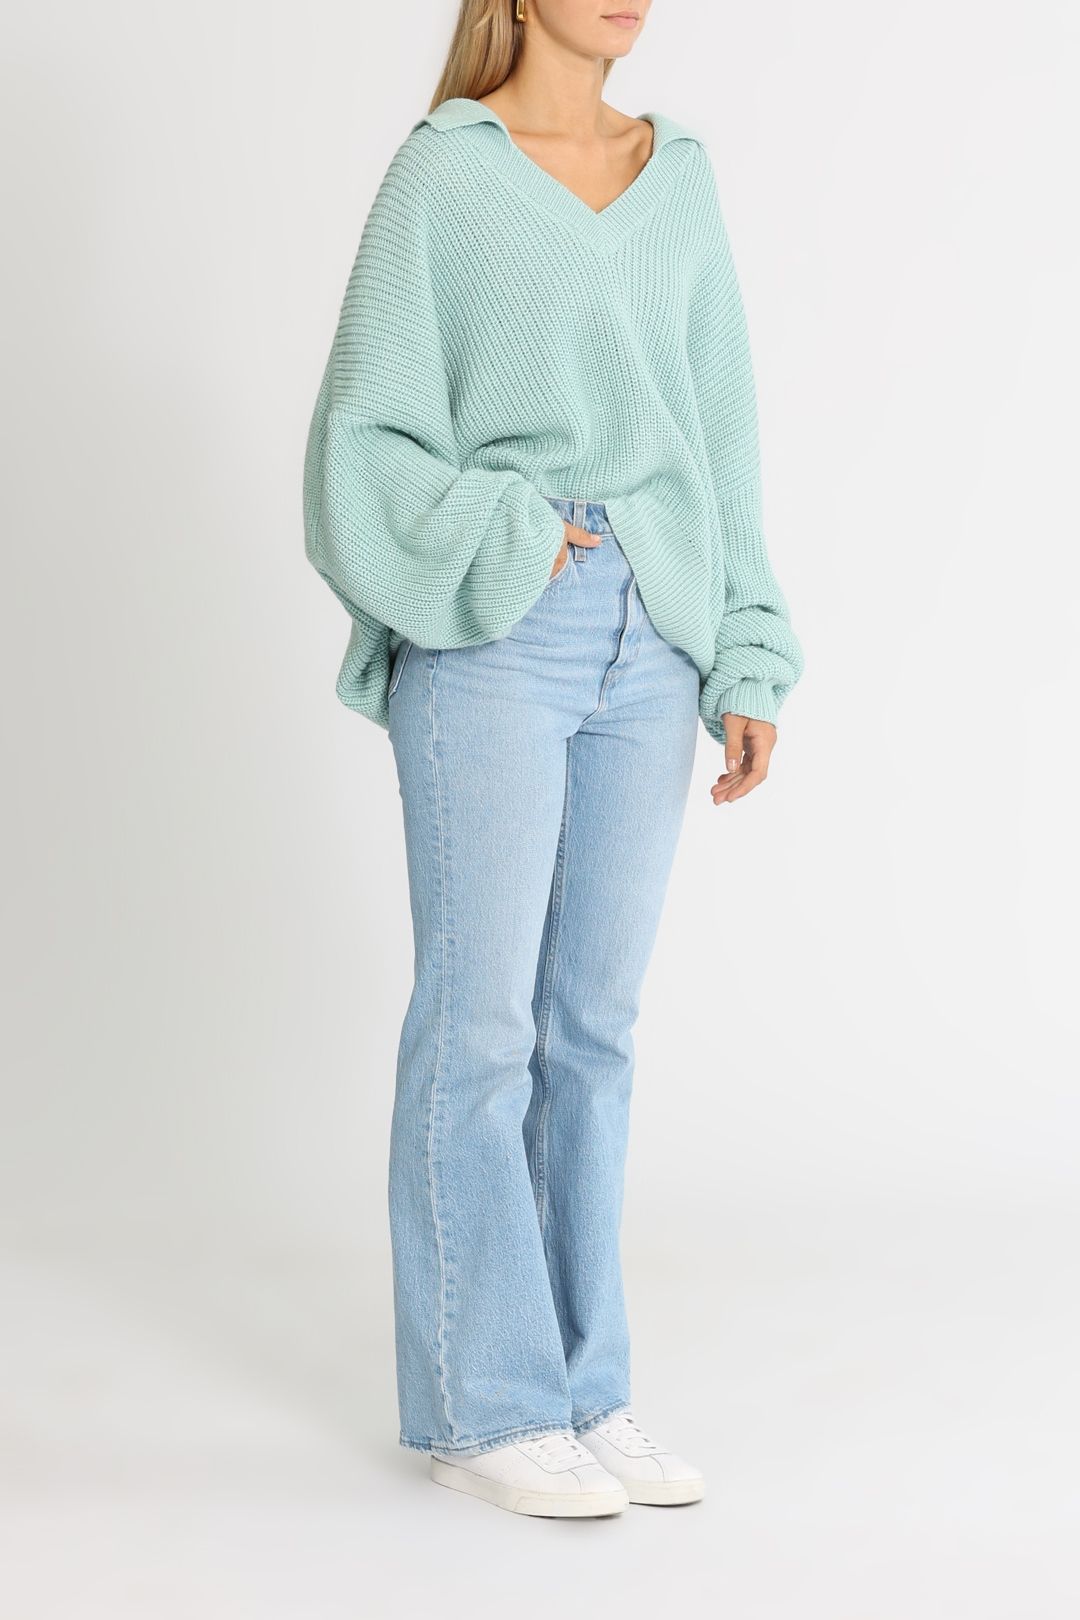 Charlie Holiday The Luciana Sweater Dusty Blue V Neck